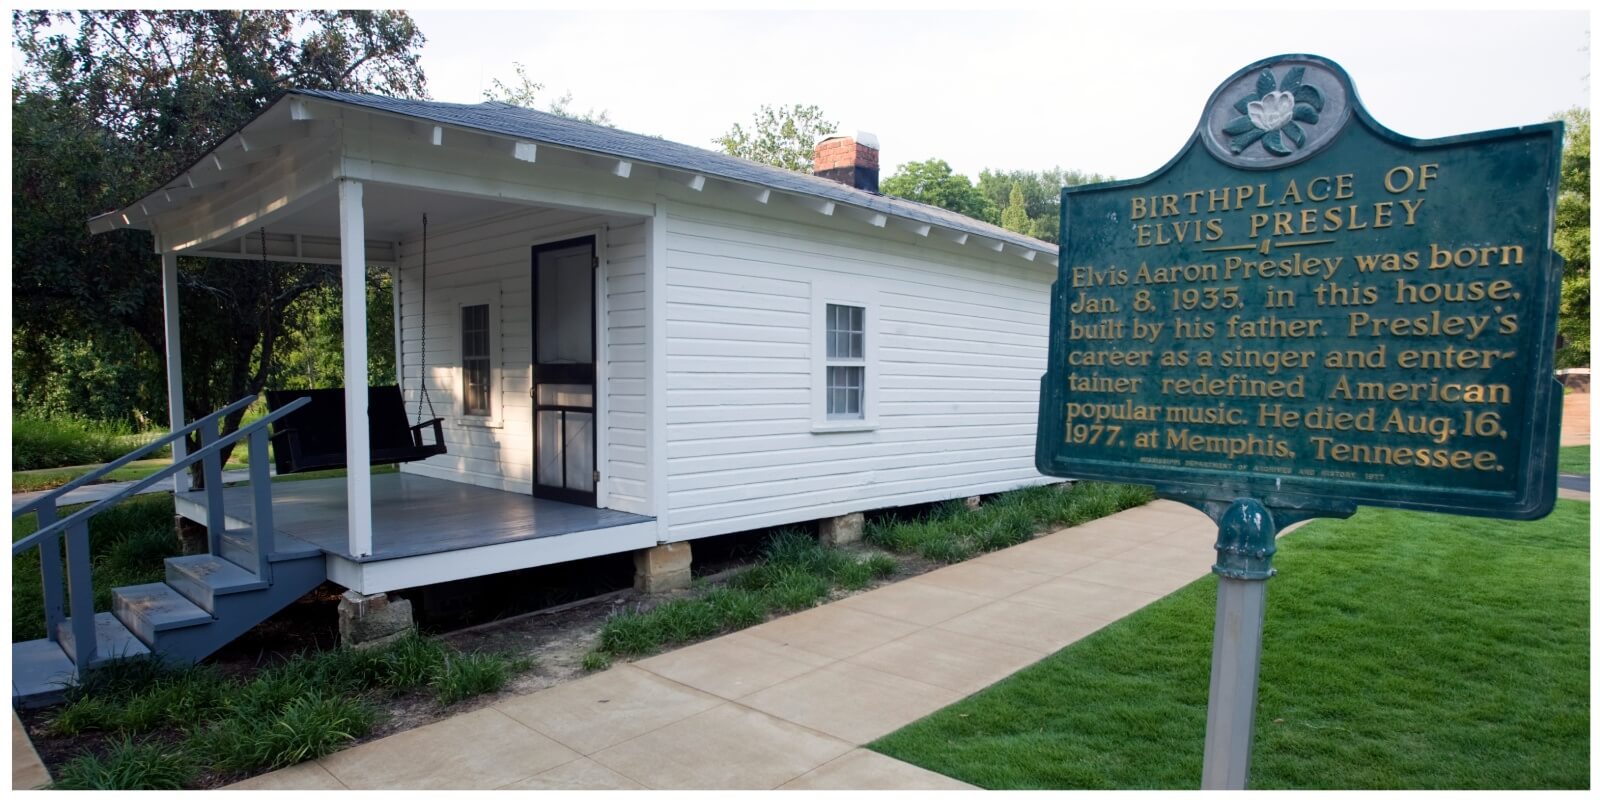 Elvis Presley's birthplace in Tupelo, MS where he lived with parents Vernon and Gladys Presley.